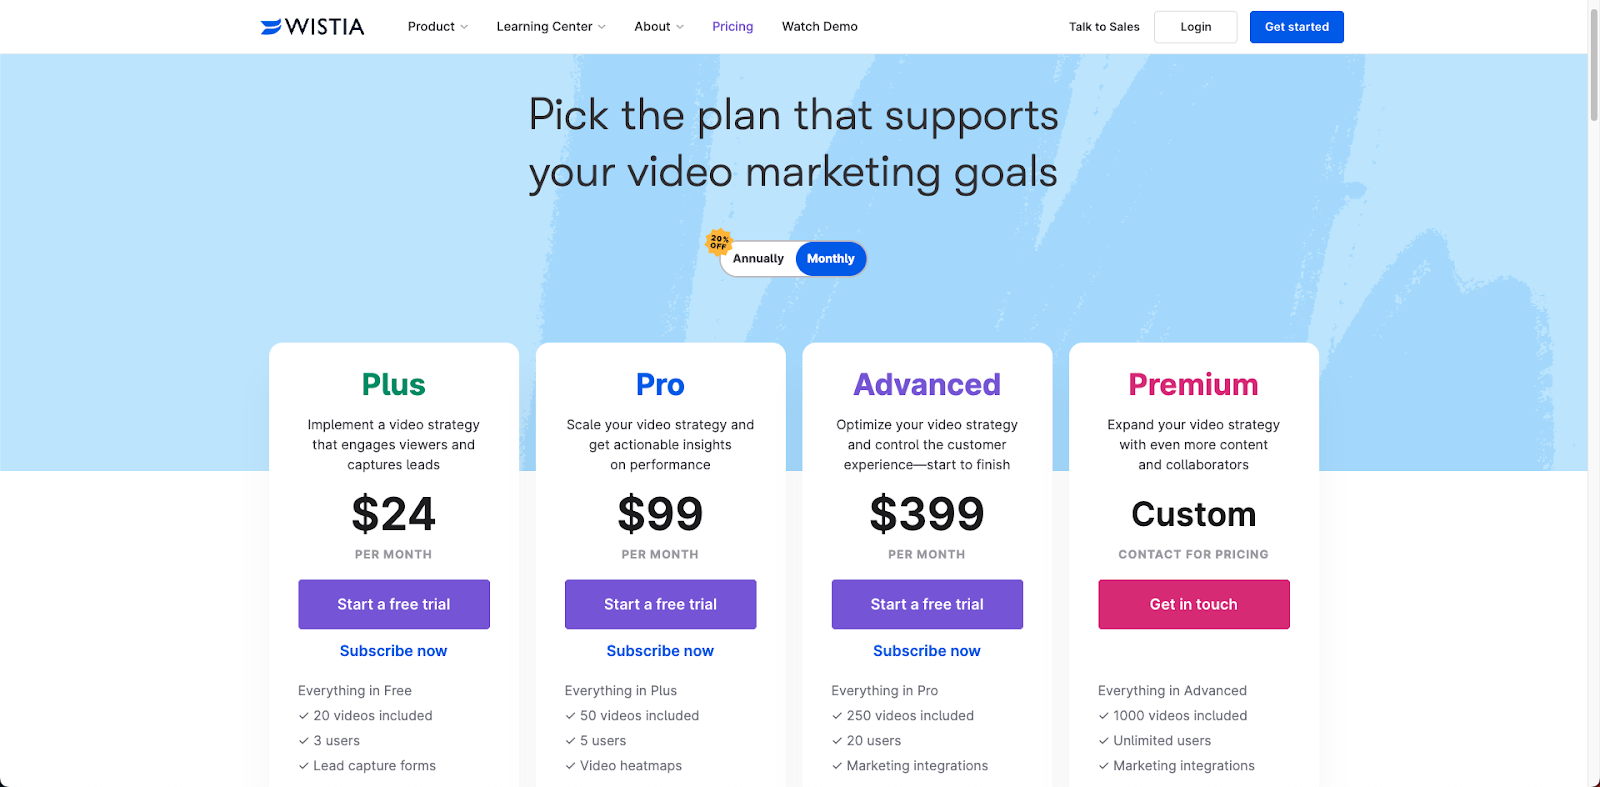 Wistia's pricing plans page